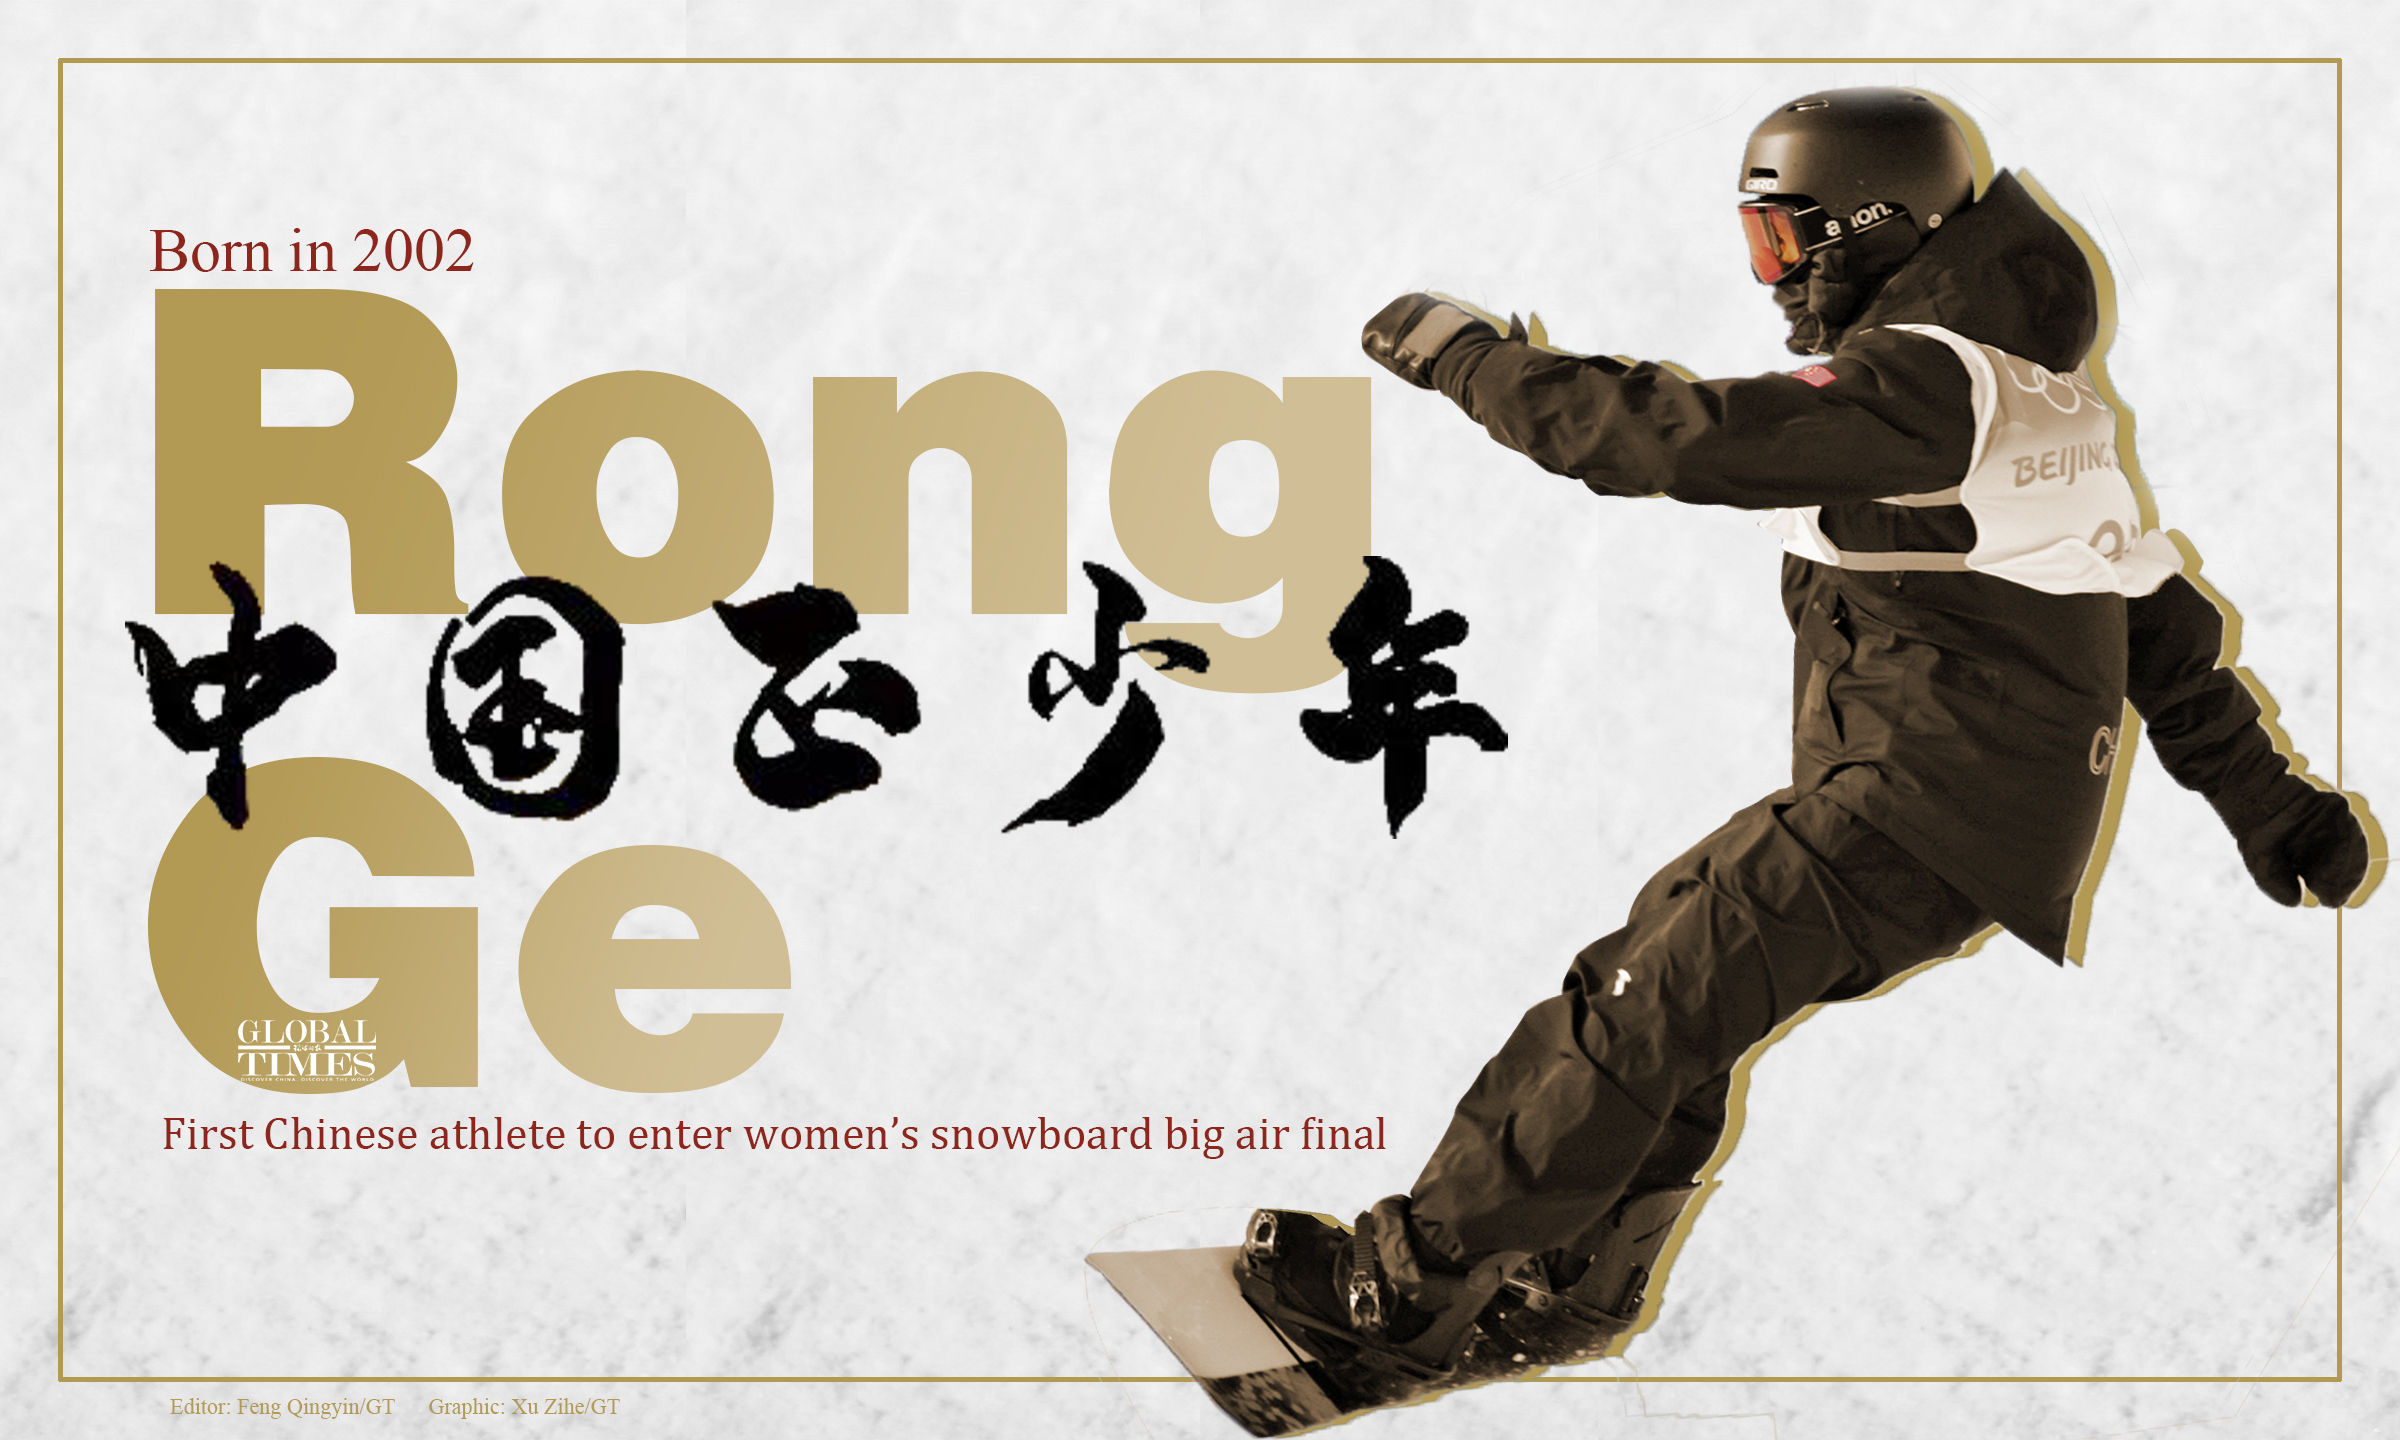 19-year-old Chinese athlete Rong Ge ranks 5th in the final of women’s snowboard big air at Beijing 2022. She is the first Chinese athlete to enter women’s snowboard big air final.